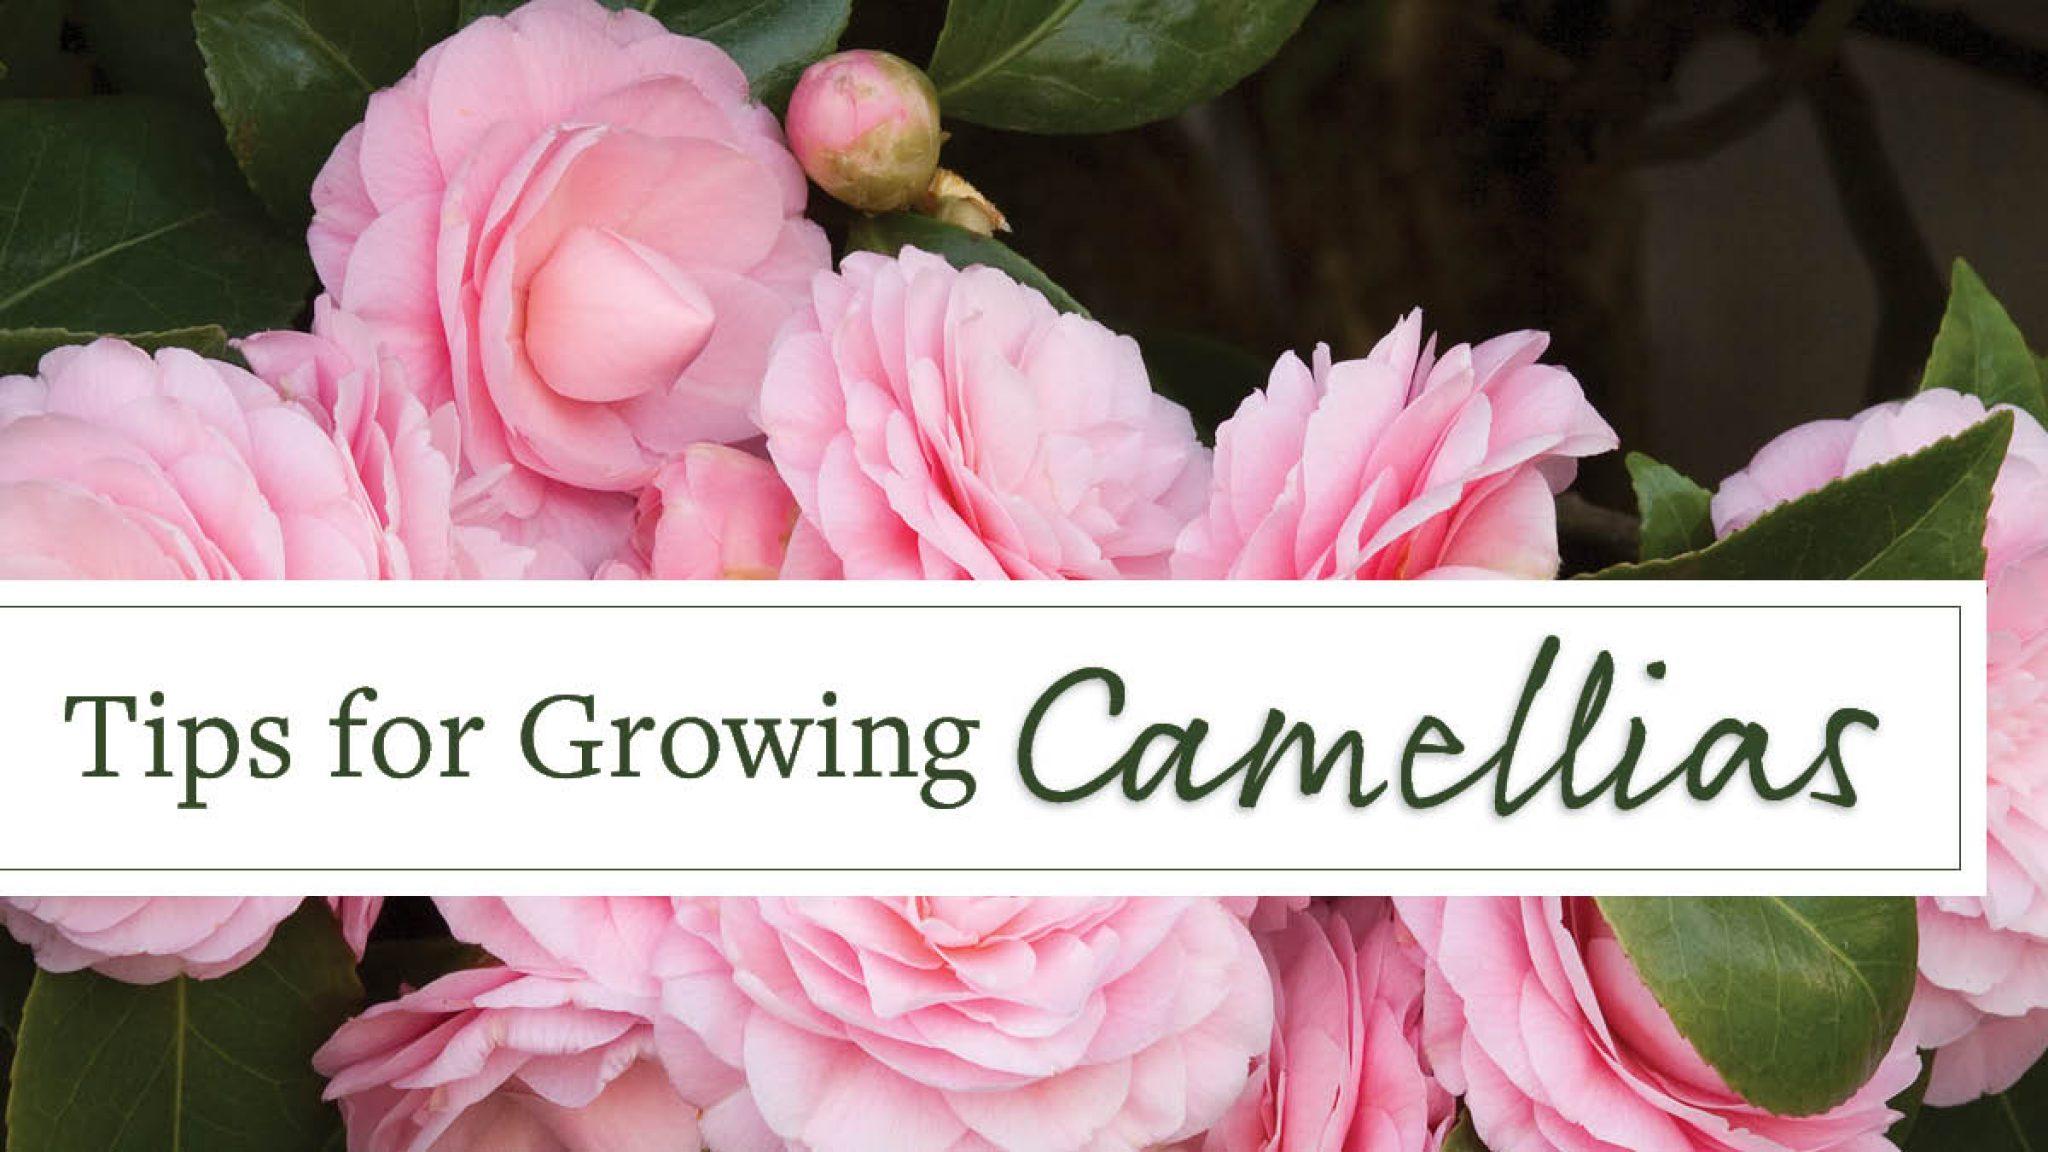 Growing Camellias: Top Tips from Monrovia